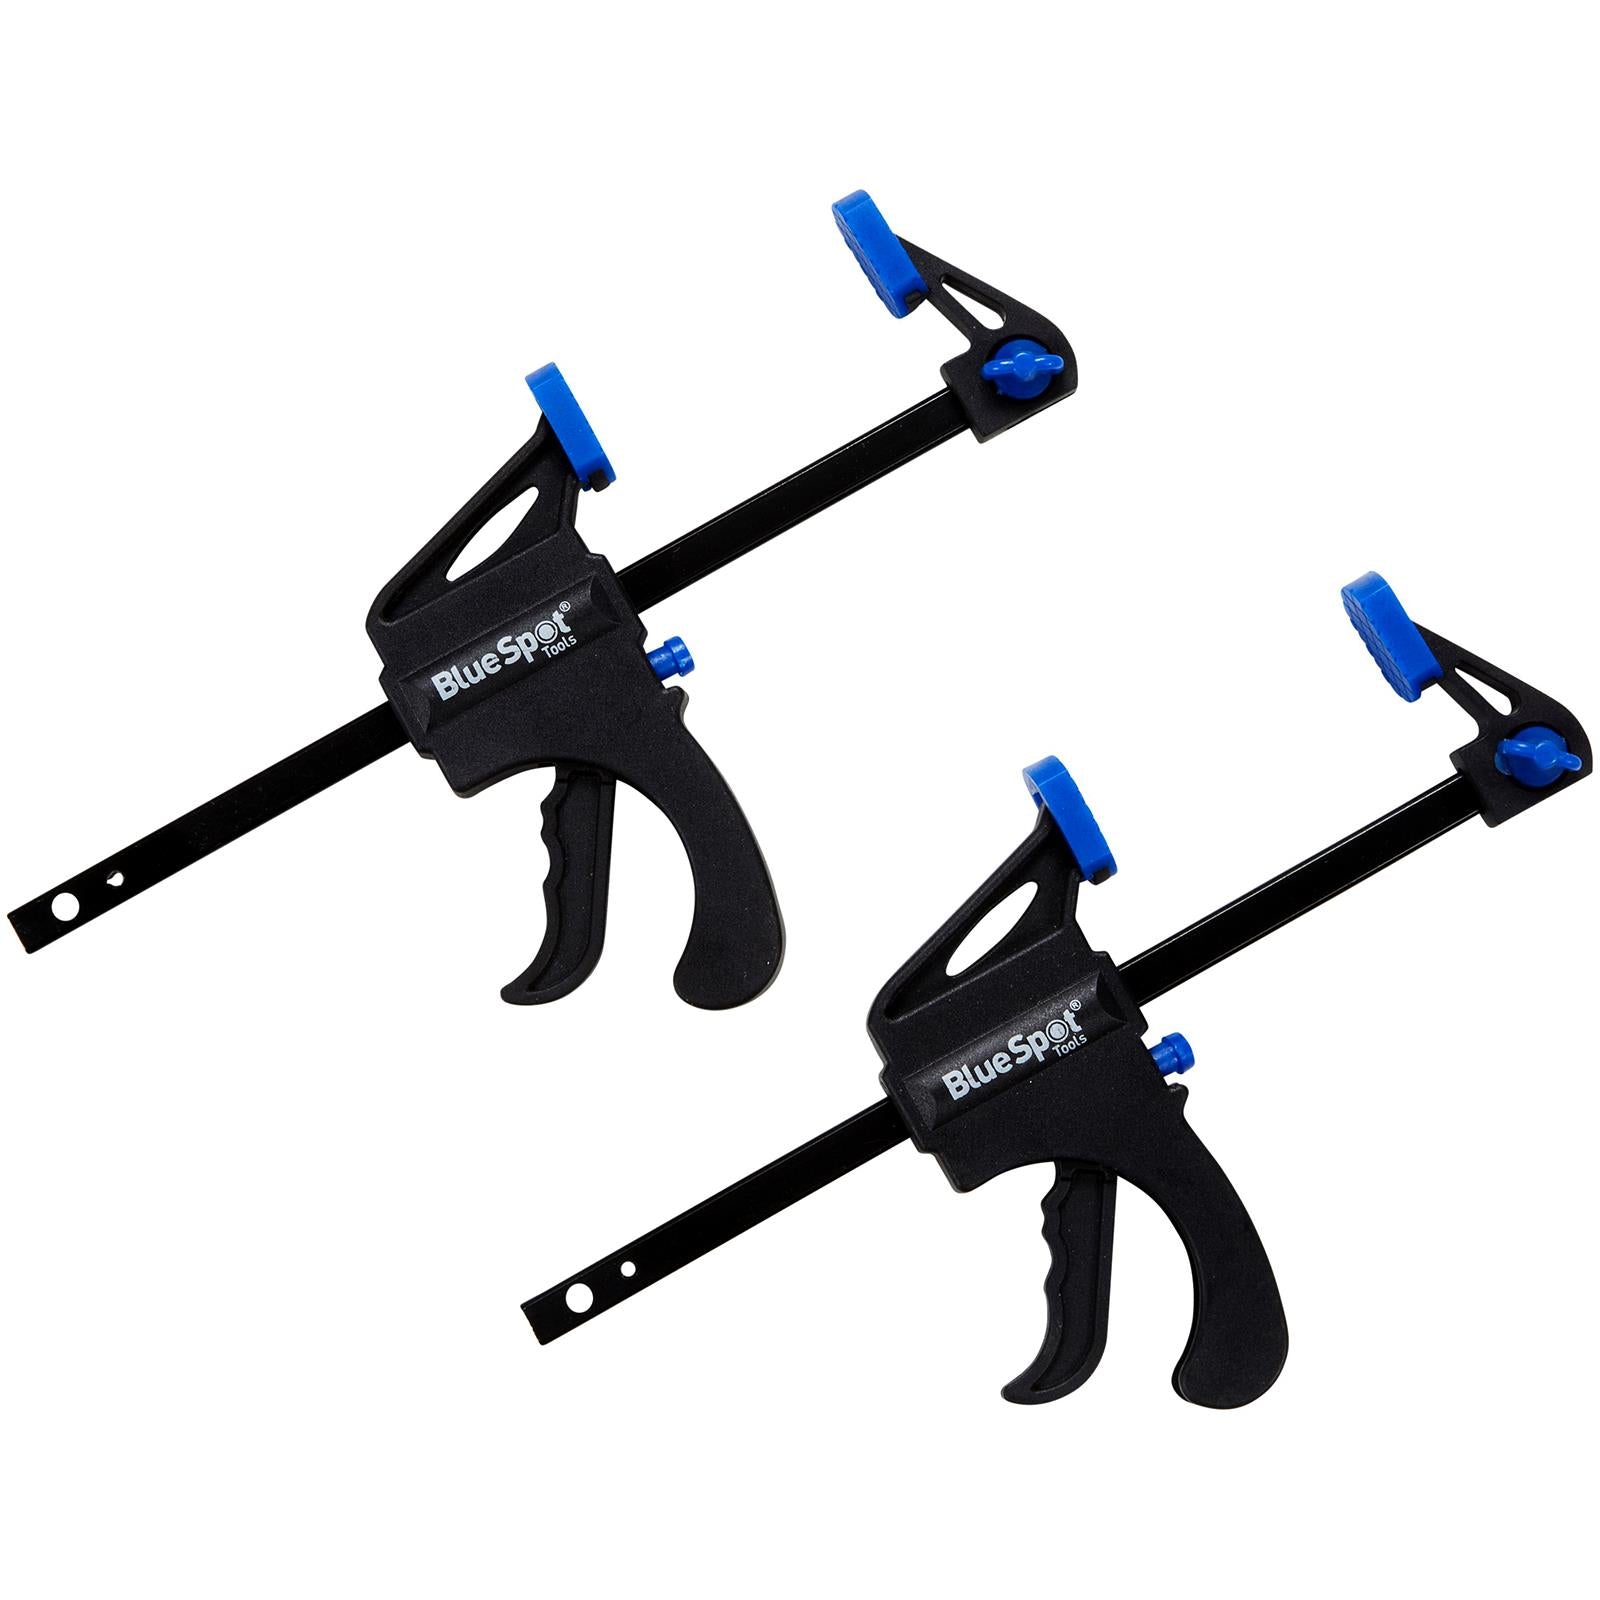 BlueSpot Ratchet Speed Clamp and Spreader 2pc 4